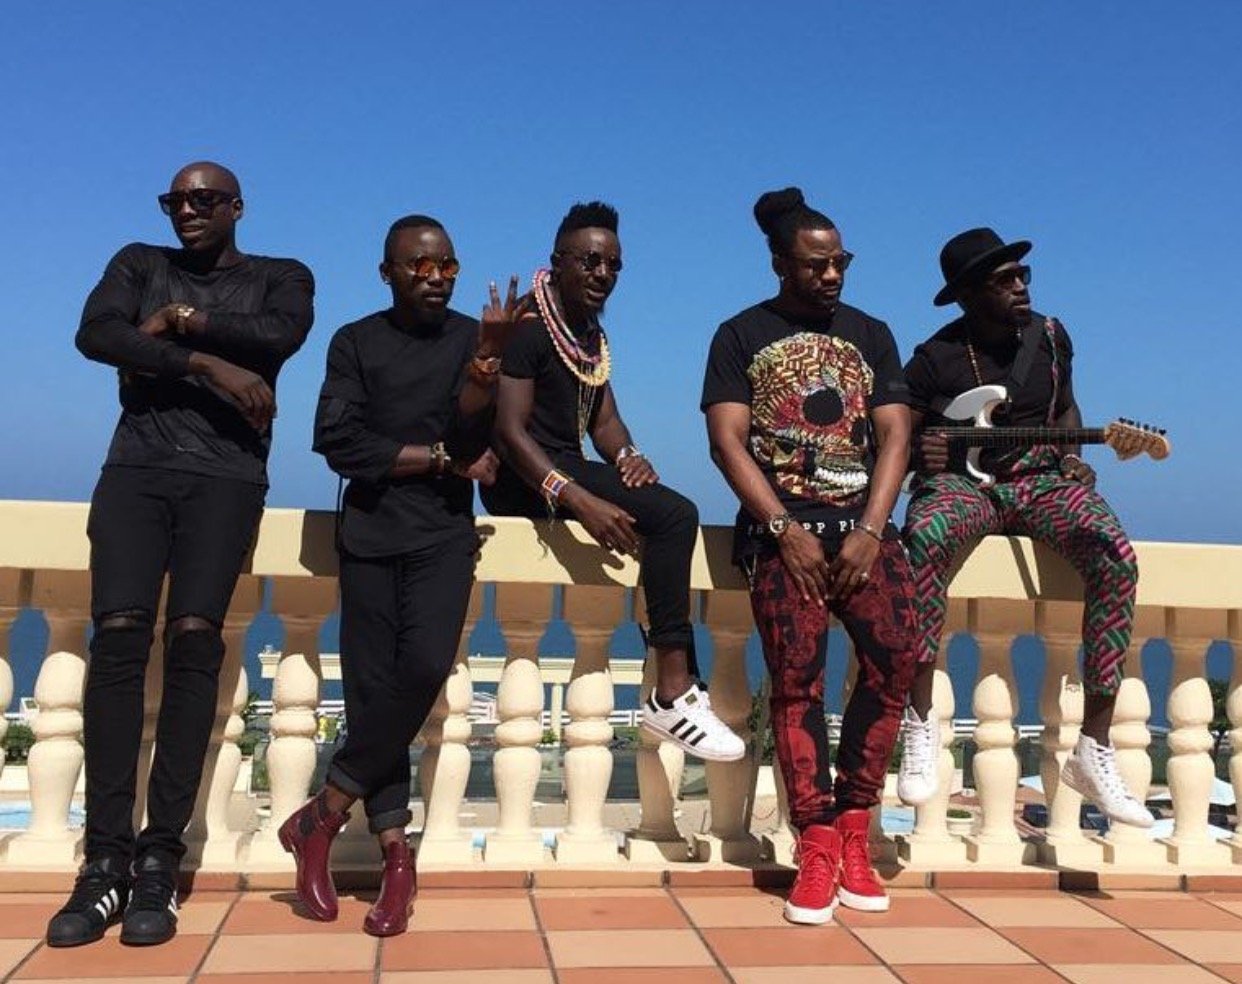 Thirst trap! Sauti Sol teams up with Angola’s hottest singer in a new project that will leave you drooling